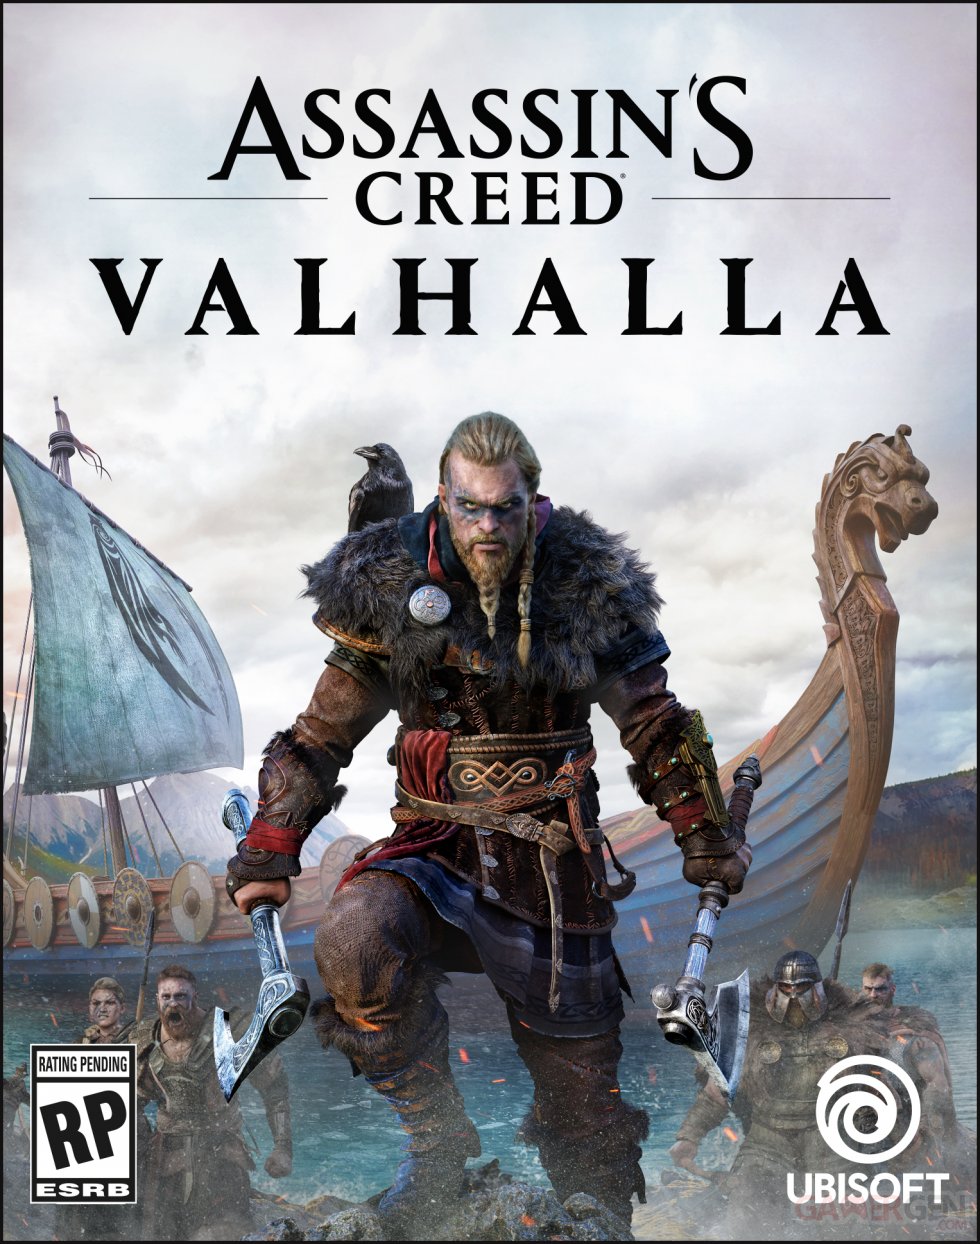 Assassin's Creed Valhalla images (8)